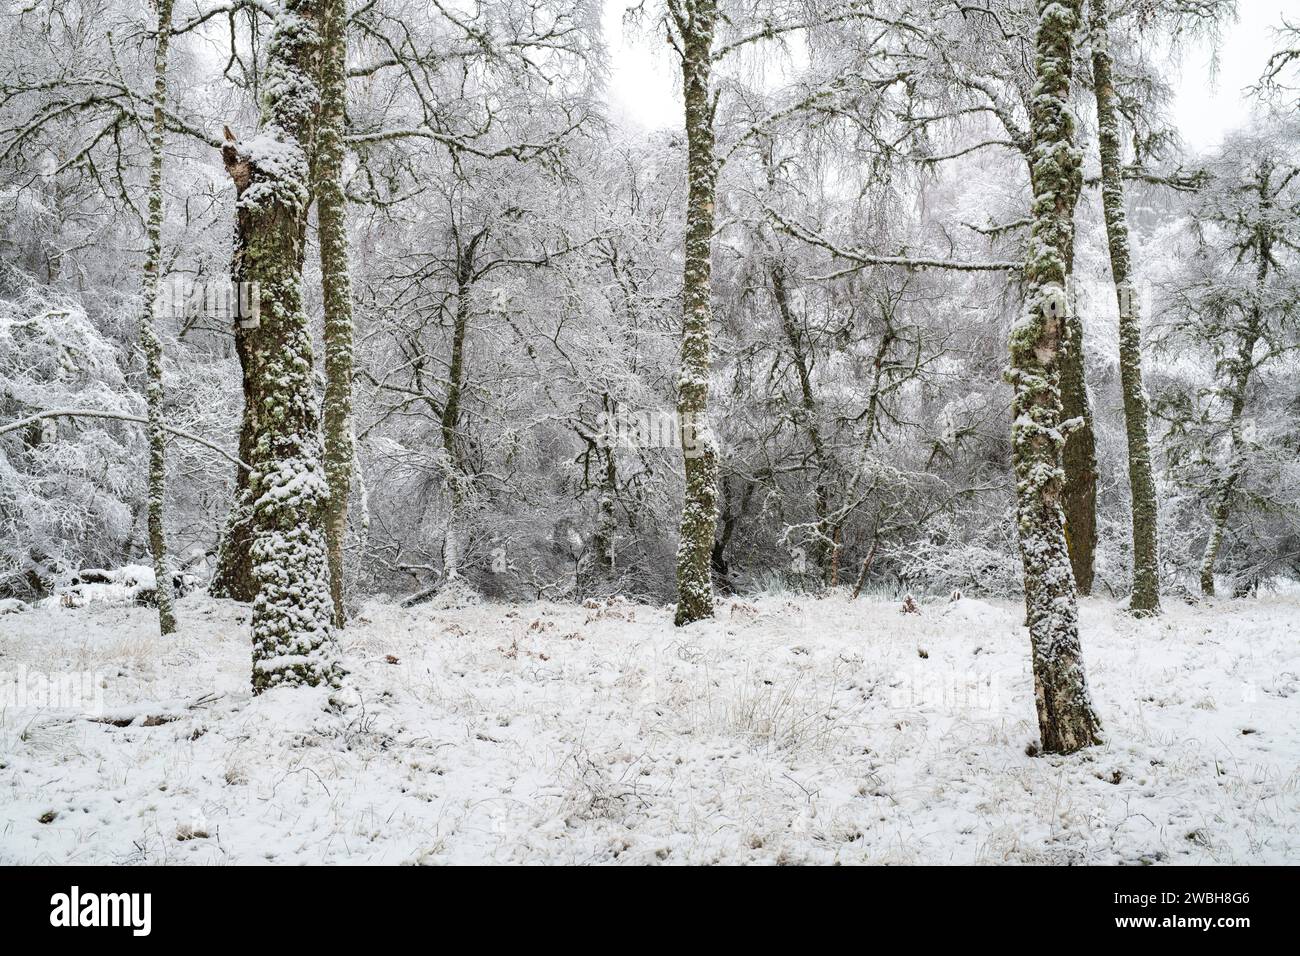 Frost and snow covered birch trees in the scottish countryside. Grantown on Spey, Highlands, Scotland Stock Photo